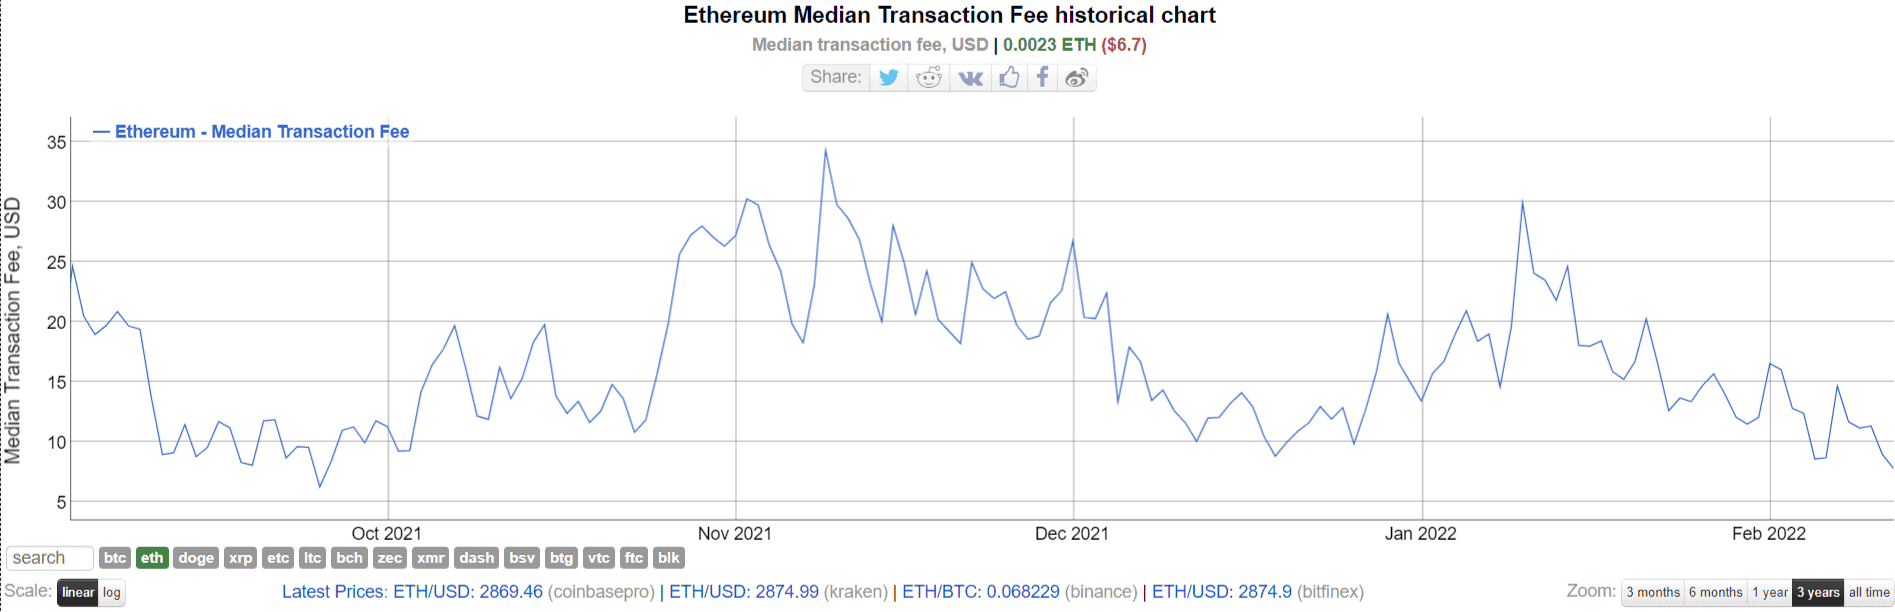 does ethereum come with any fees